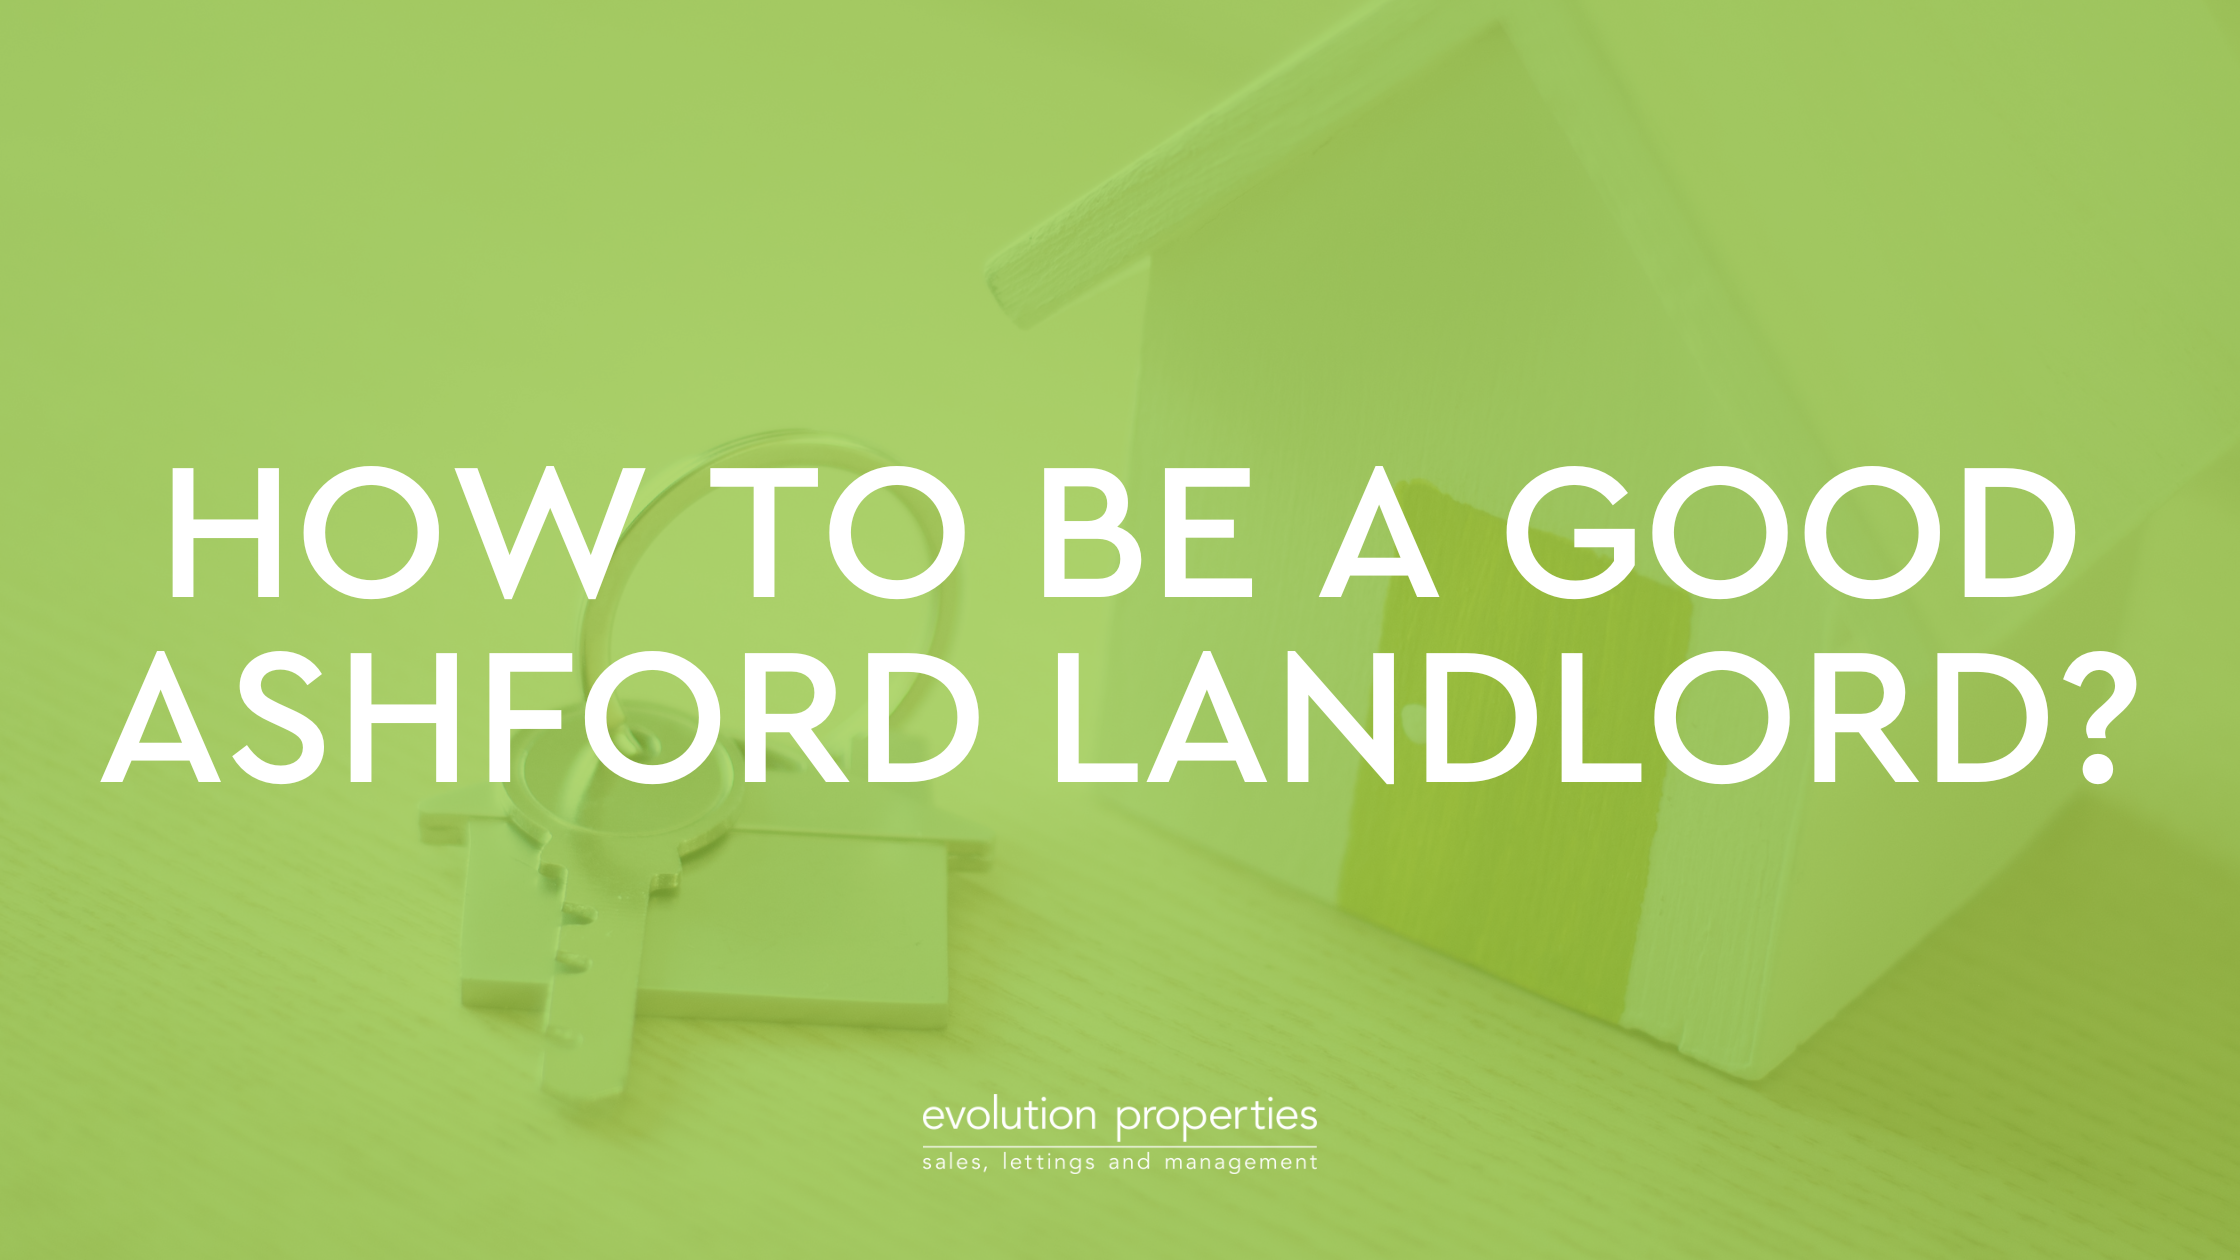 How to be a good Ashford landlord